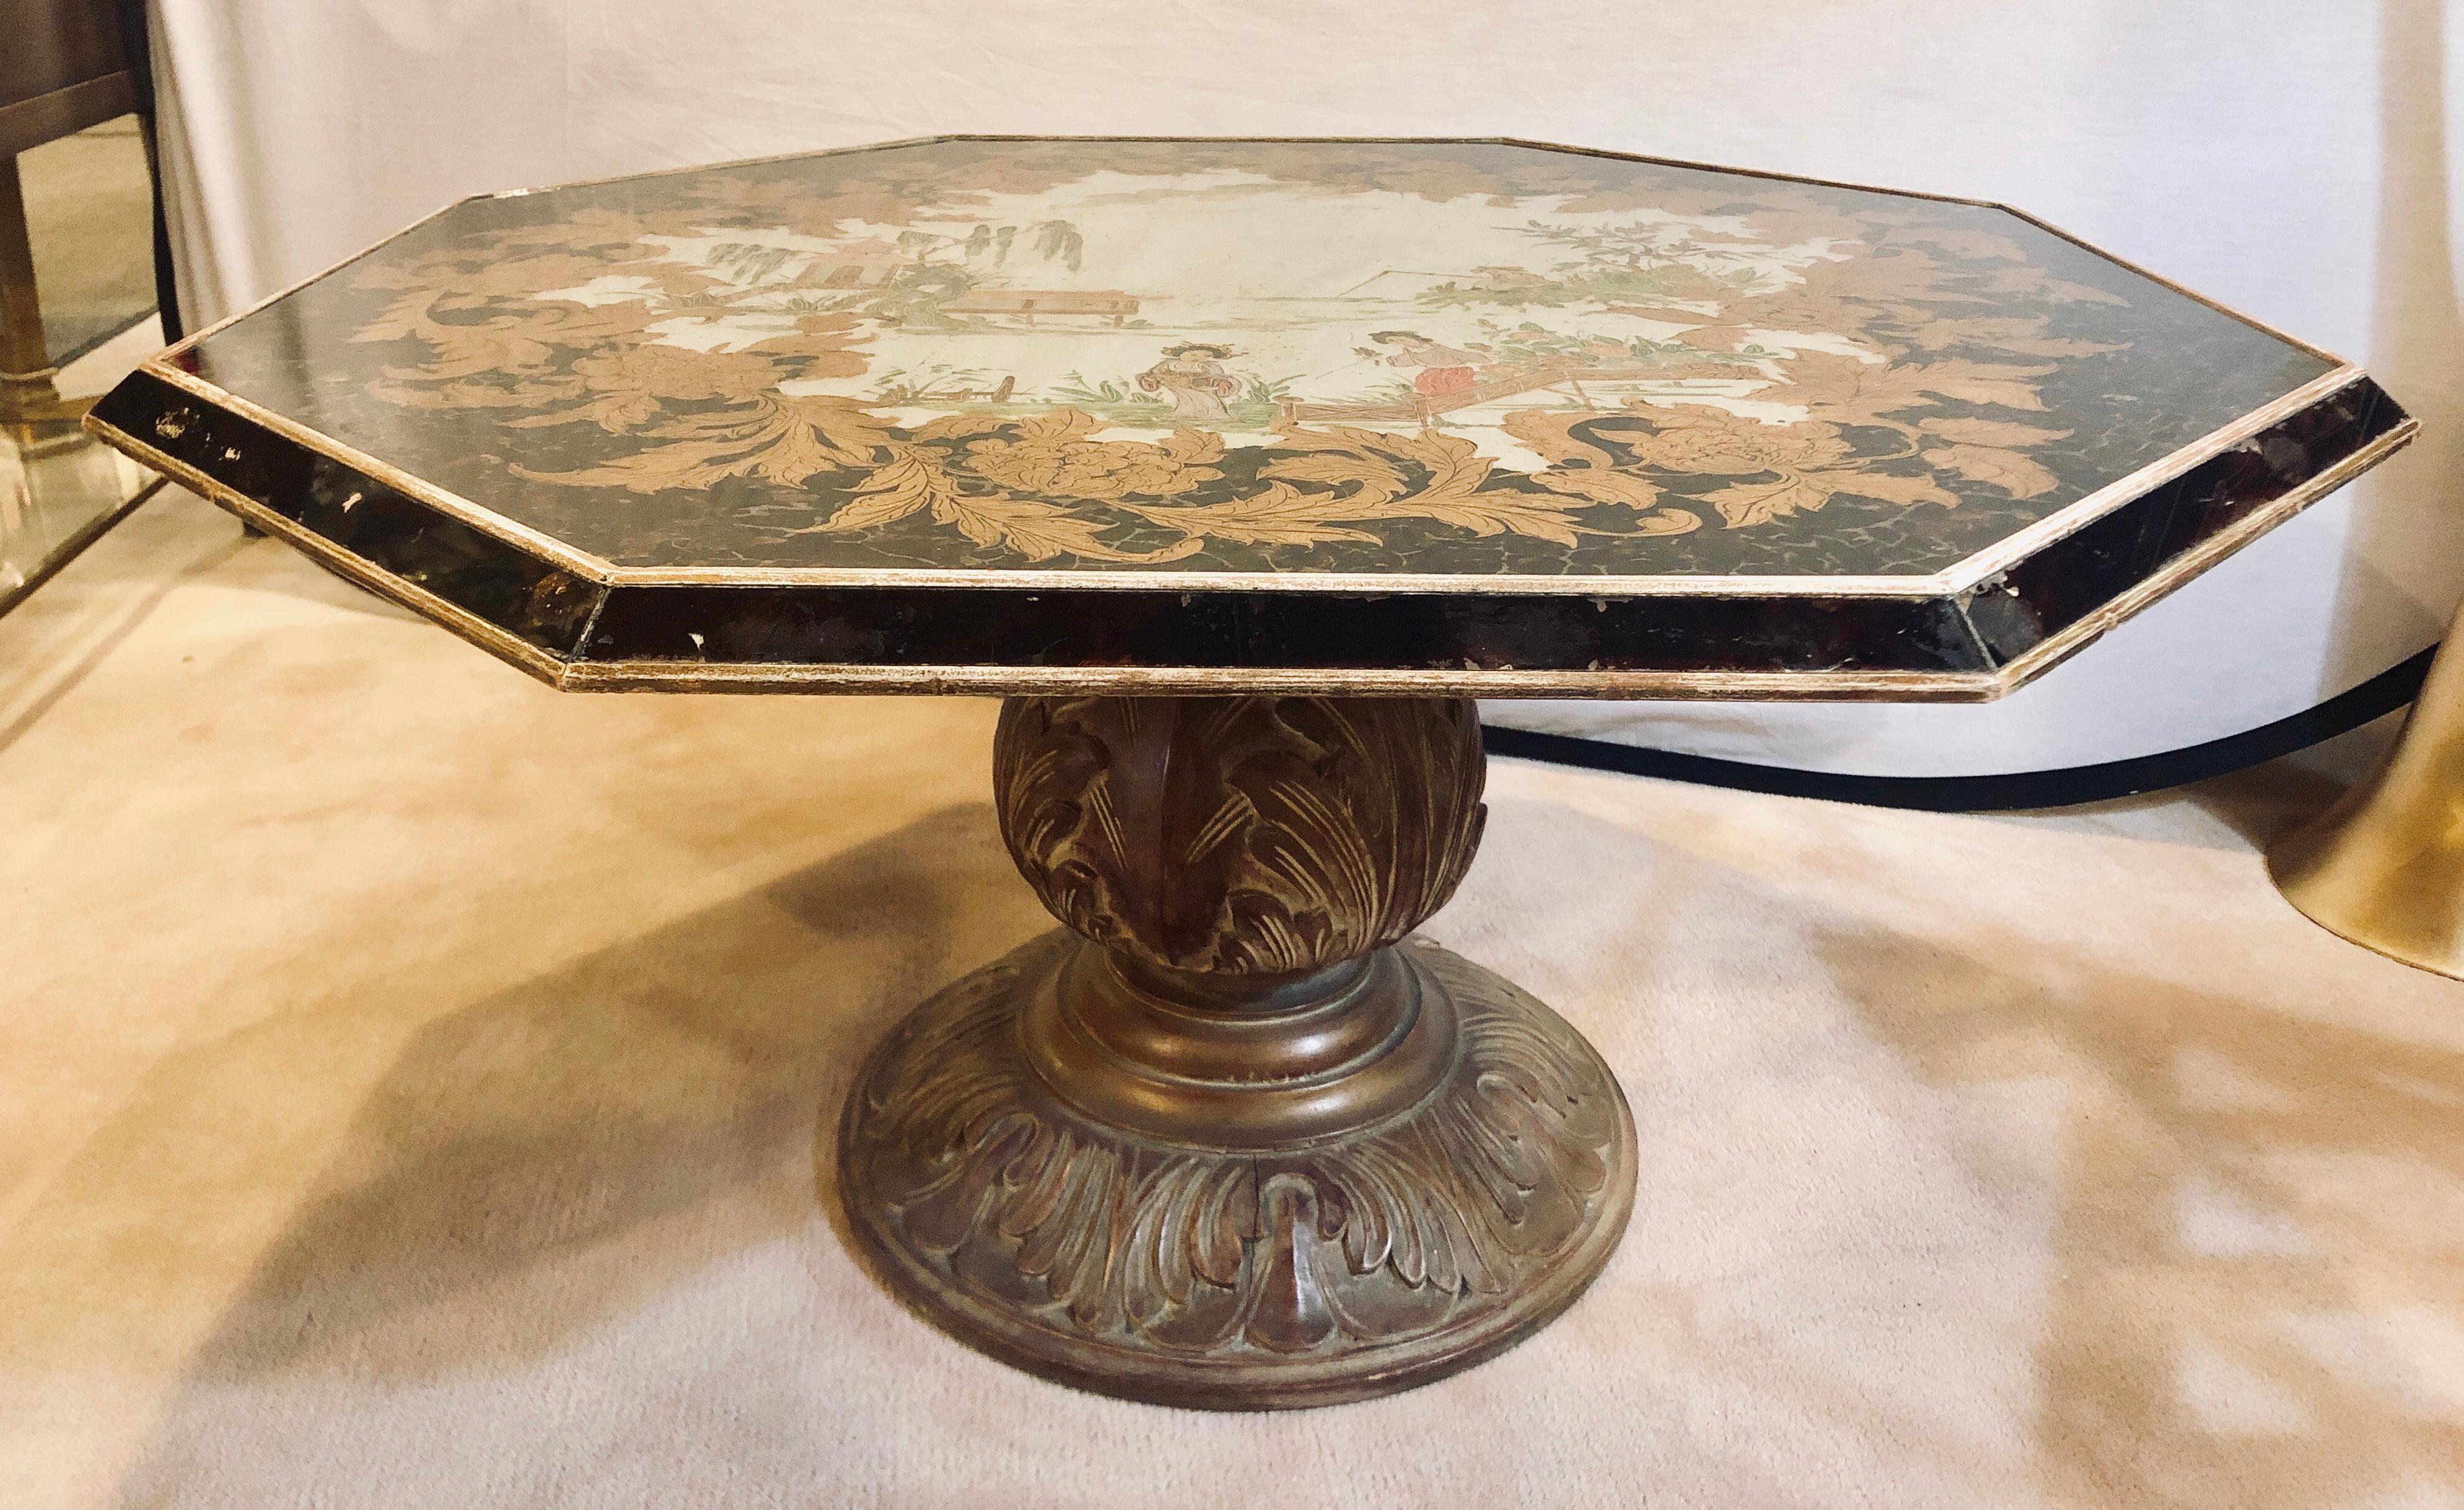 Chinese Export Octagon Chinoiserie Decorated Mirror Top Low Coffee Table with Carved Wood Base For Sale